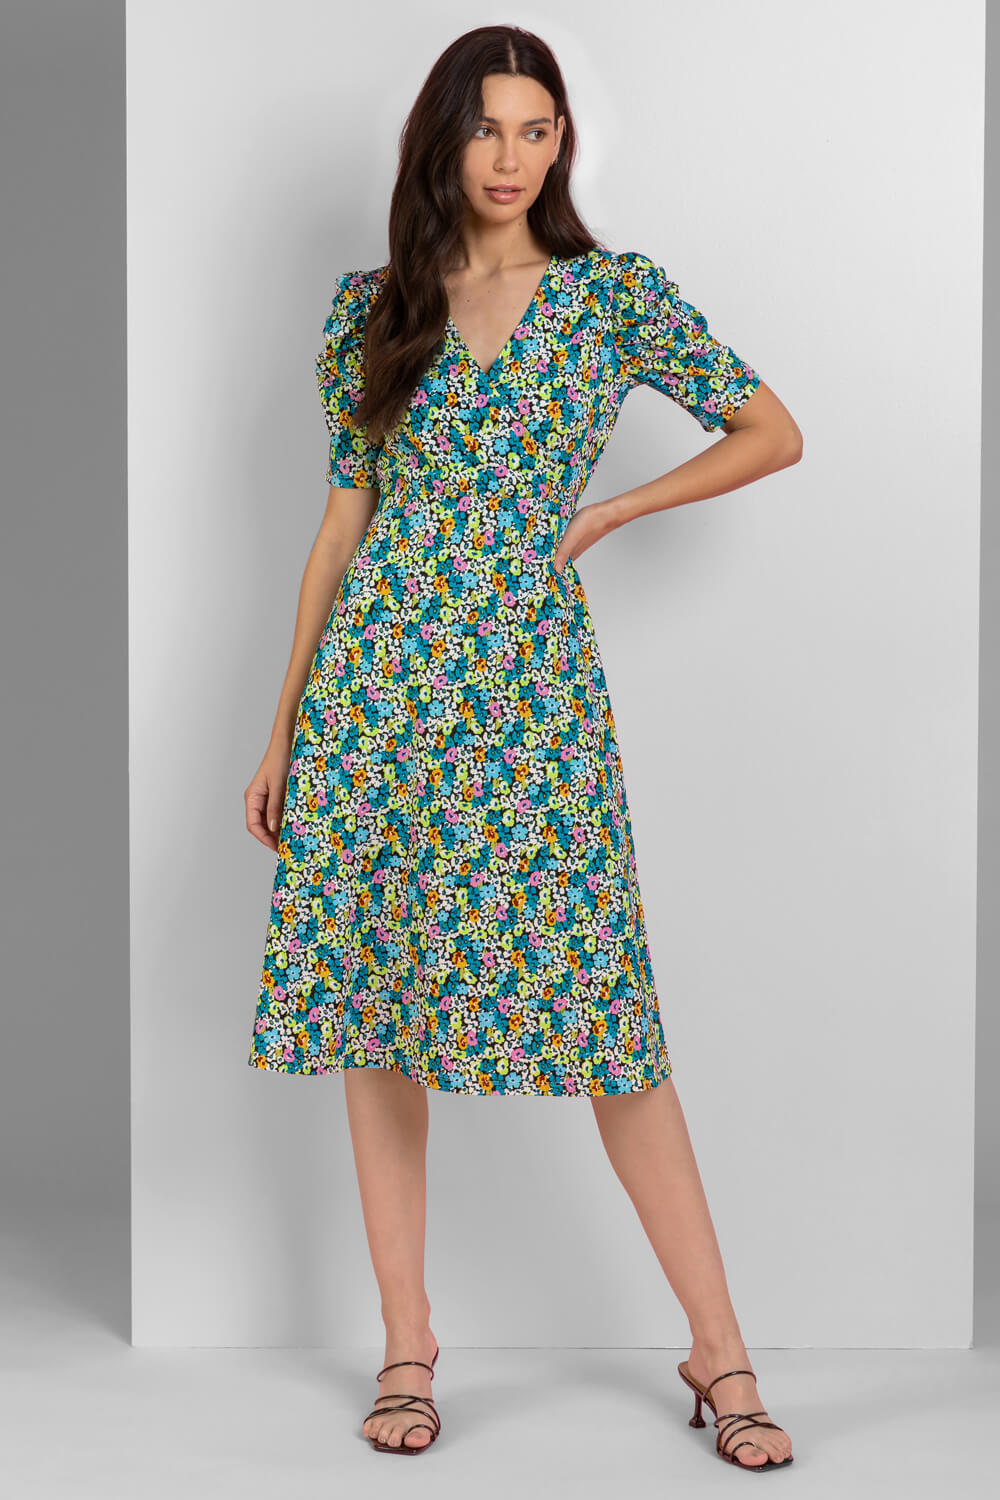 Blue Floral Print Puff Sleeve Wrap Dress, Image 3 of 5